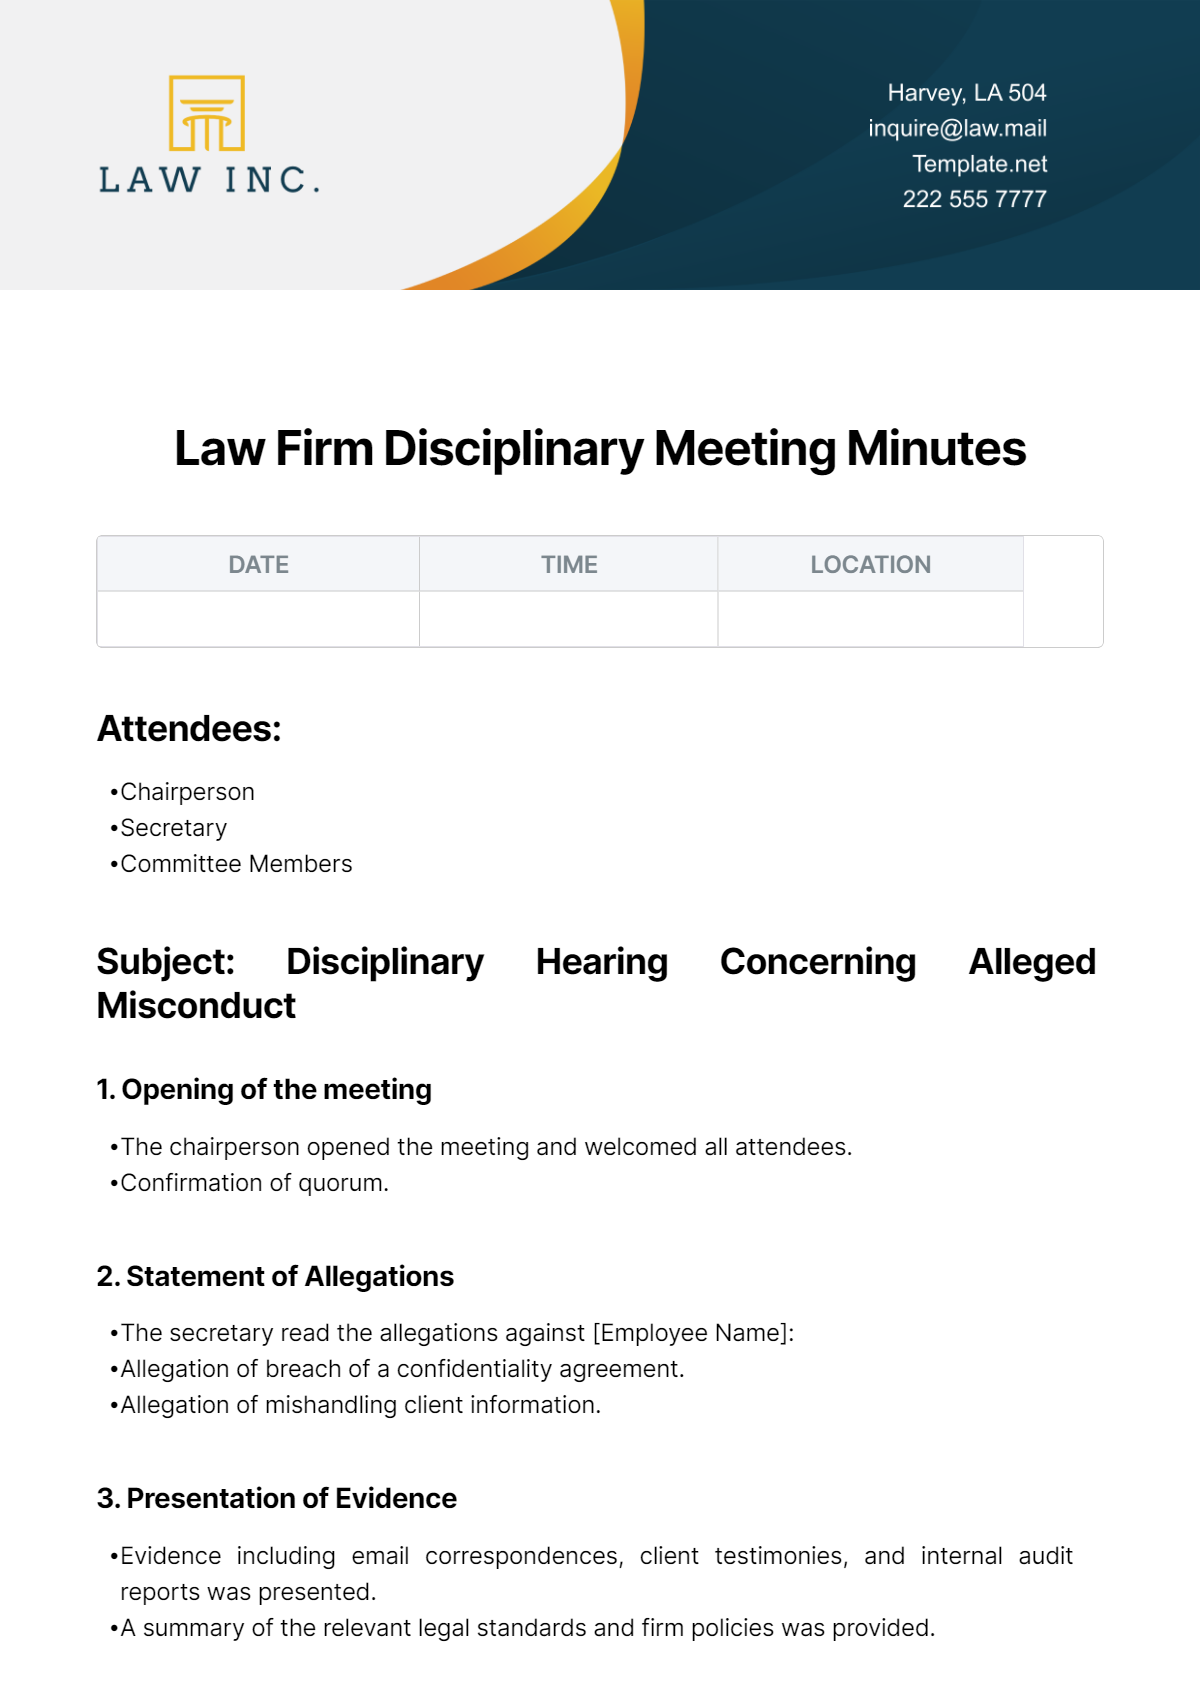 Free Law Firm Disciplinary Meeting Minutes Template